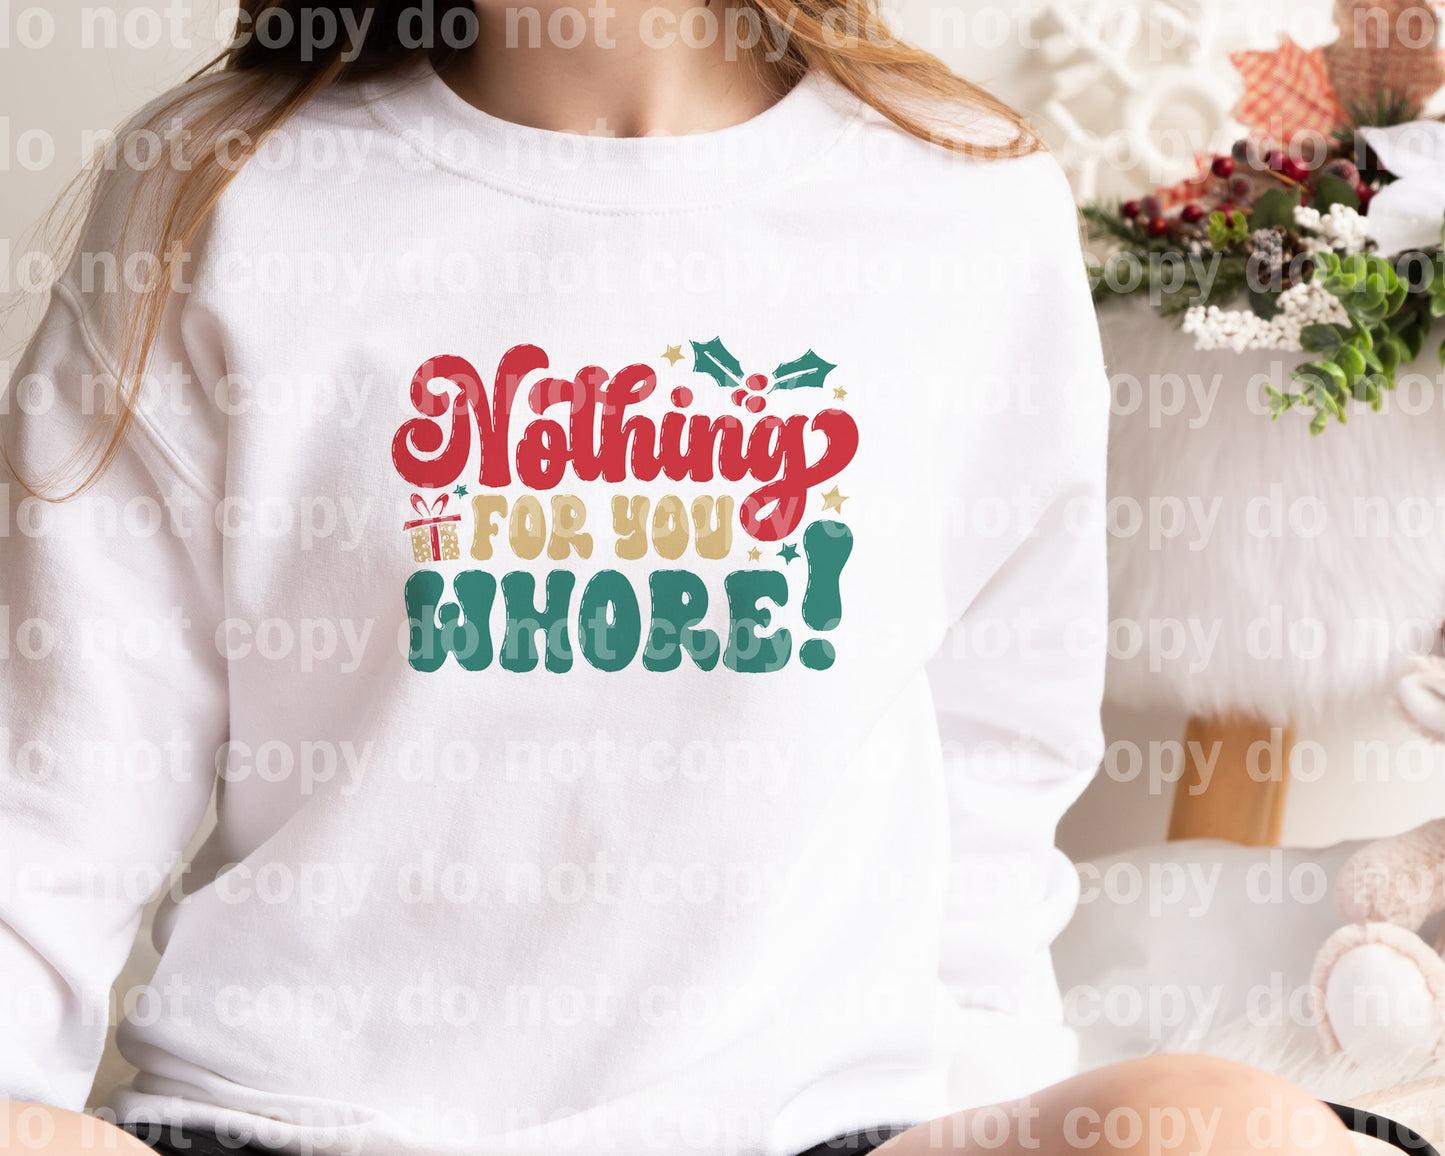 Nothing For You Whore Black/White Background Dream Print or Sublimation Print